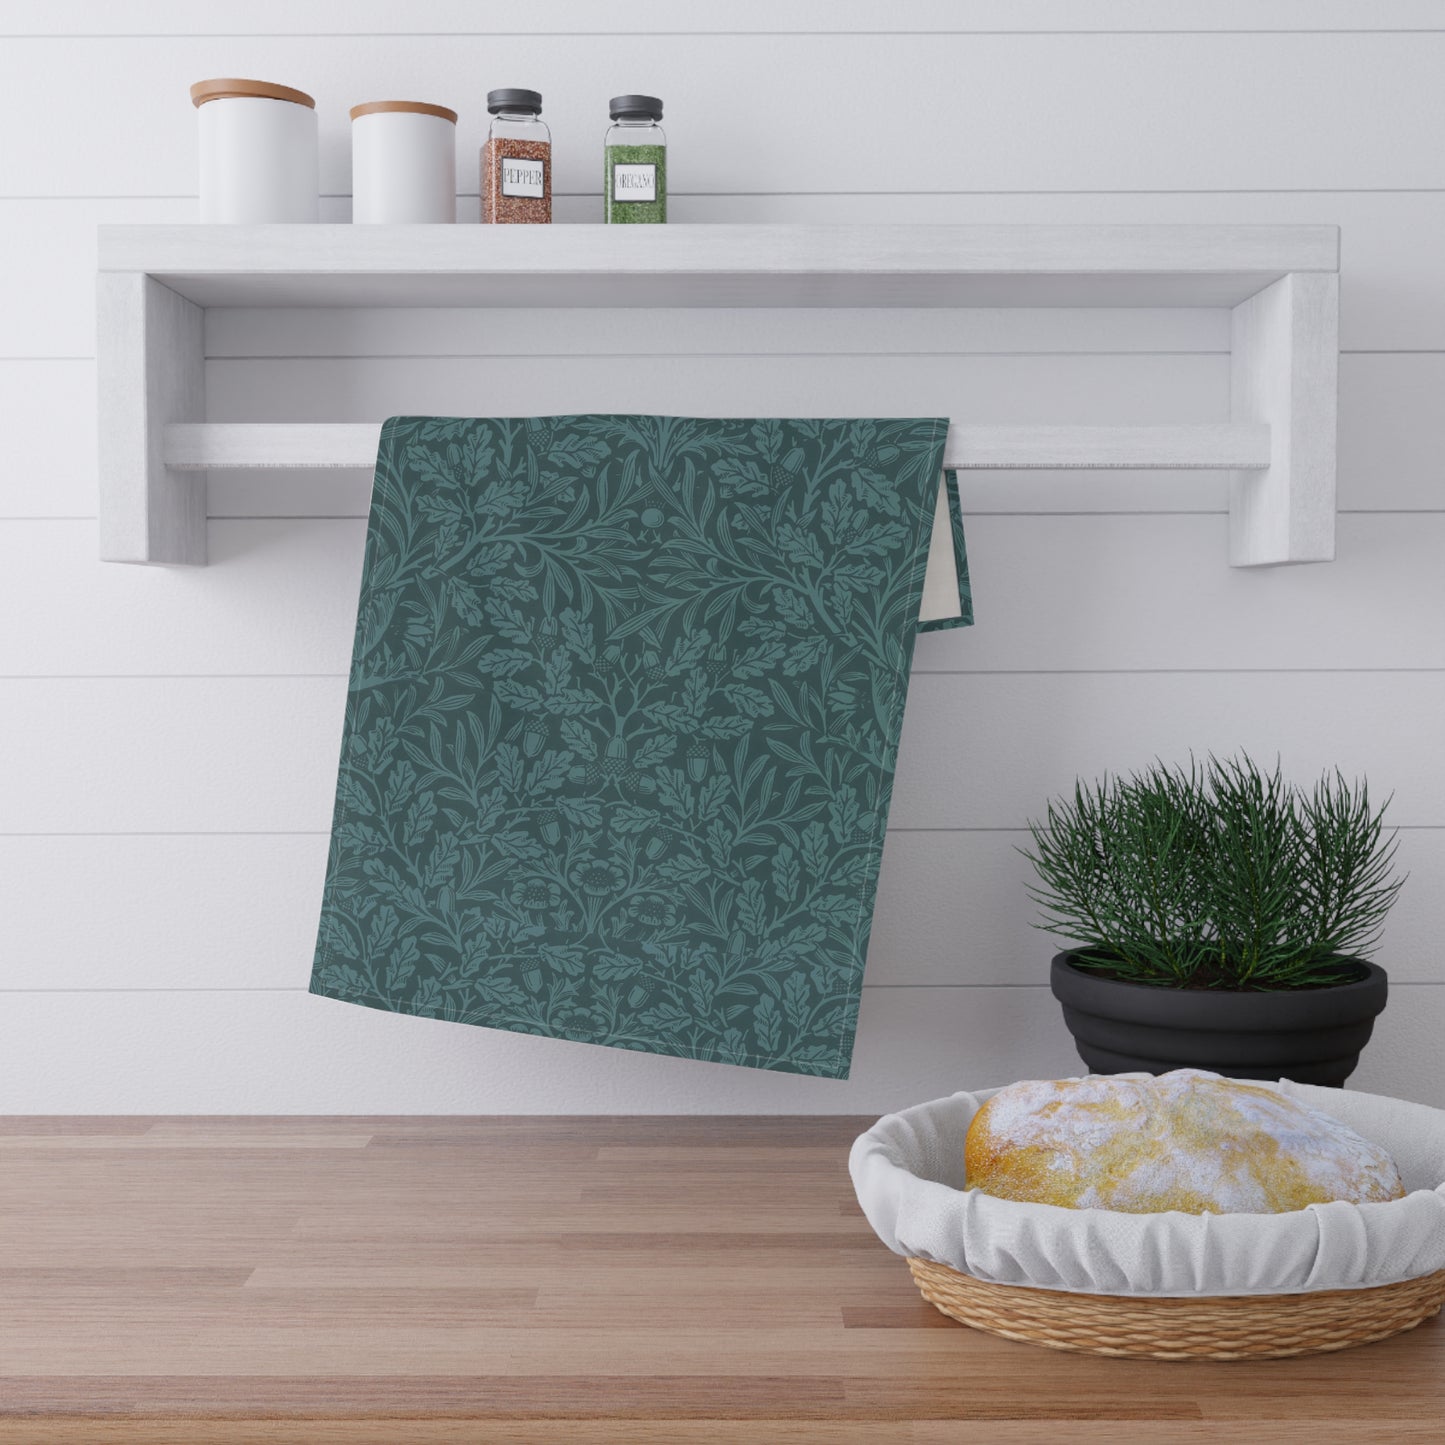 william-morris-co-kitchen-tea-towel-acorn-and-oak-leaves-collection-teal-8